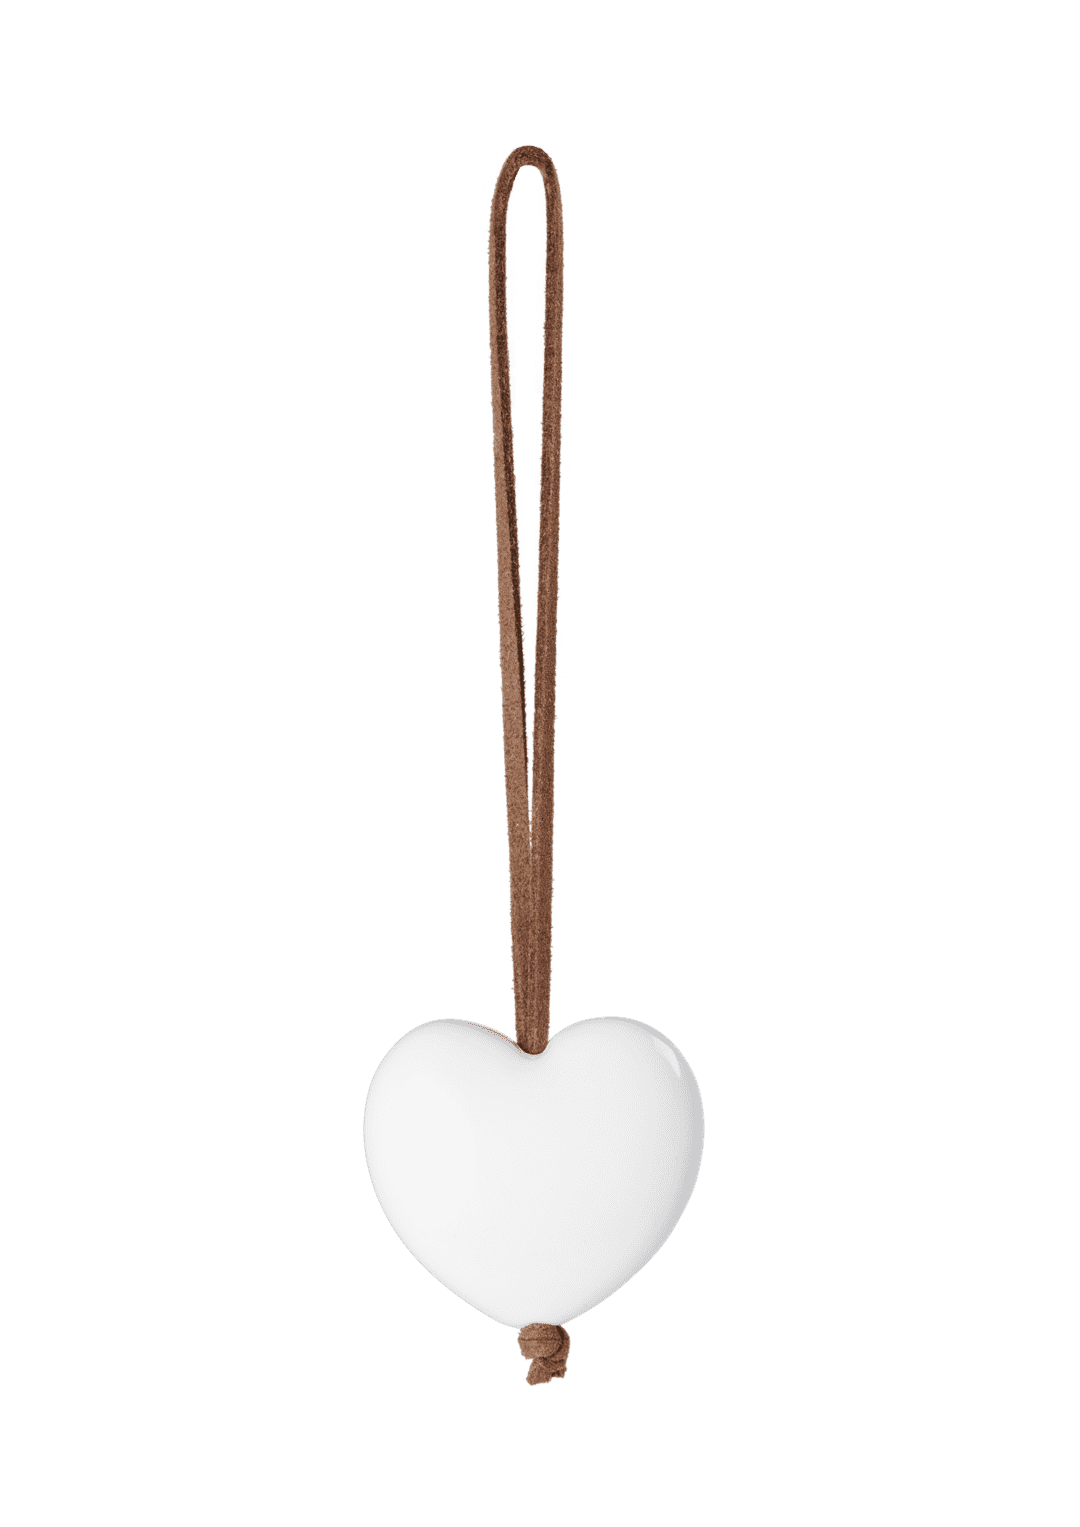 Nordic Tales Heart glossy white H4.6 H: 1.8" W: 2" D: 1"